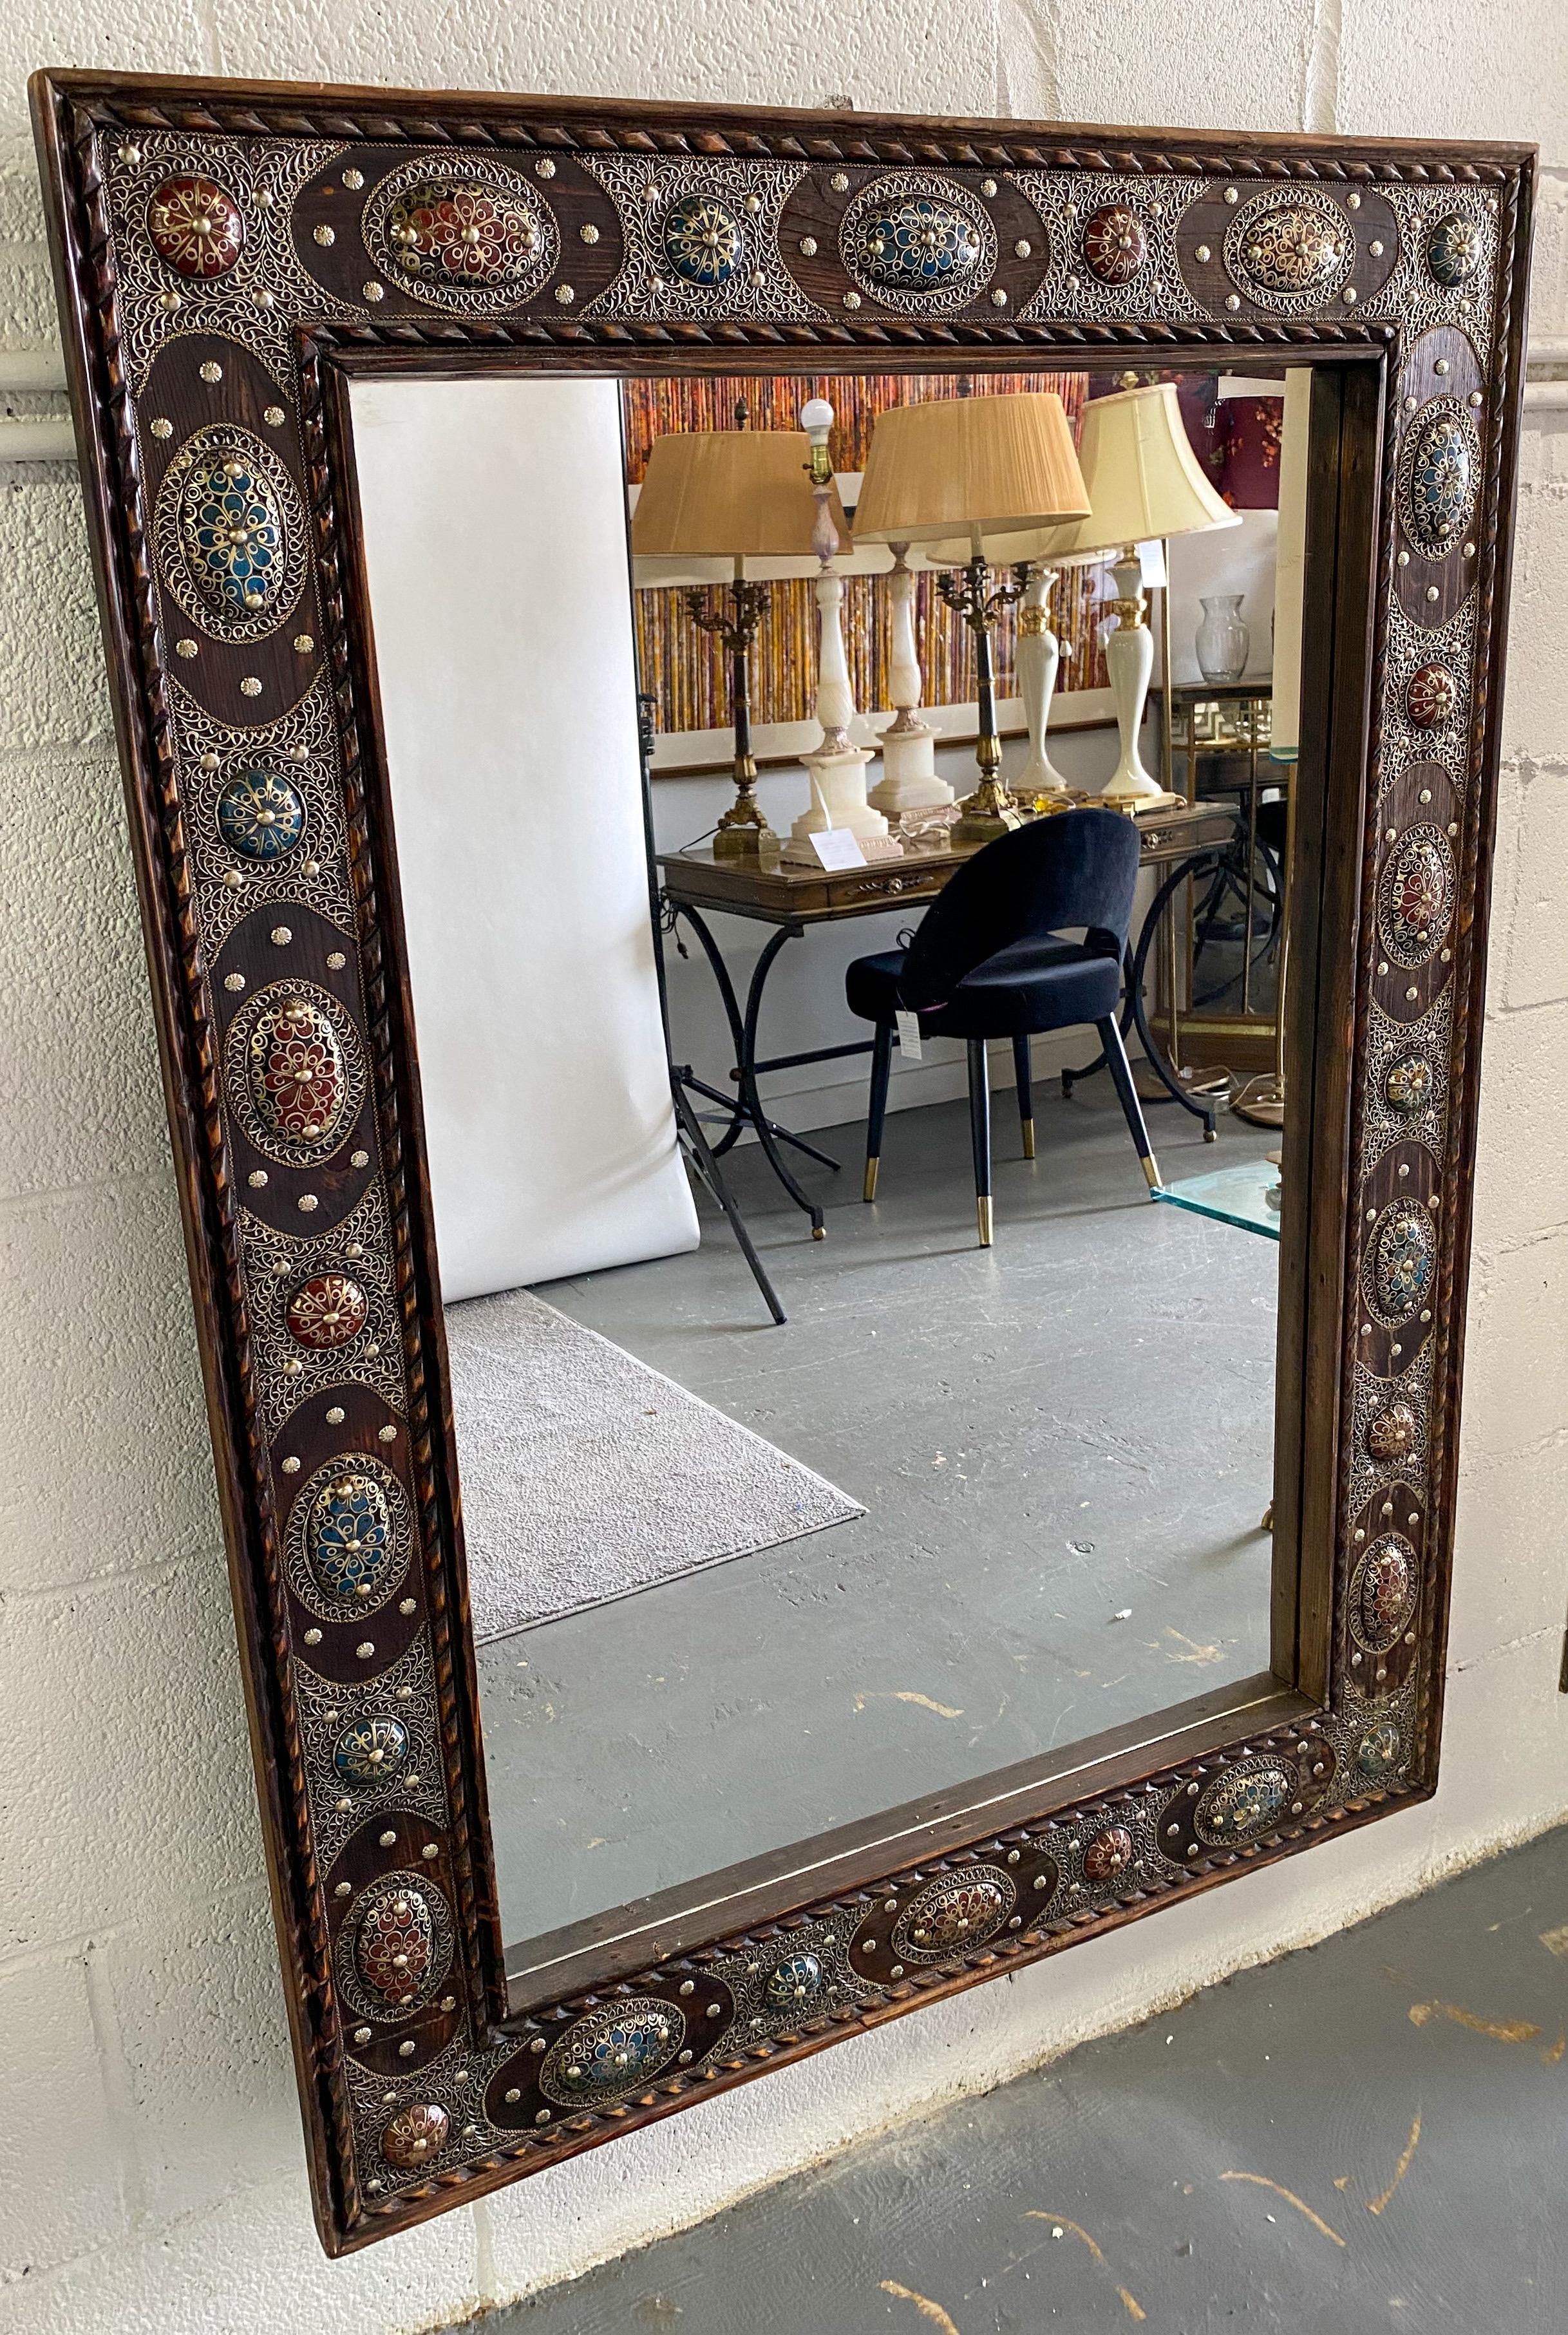 An impressive piece that speaks equally to nuanced artisan craftsmanship and bold imagination, this Hollywood Regency style mirror is a sumptuous and entrancing home decor item that will elevate the style of any room. Handcrafted from genuine cedar